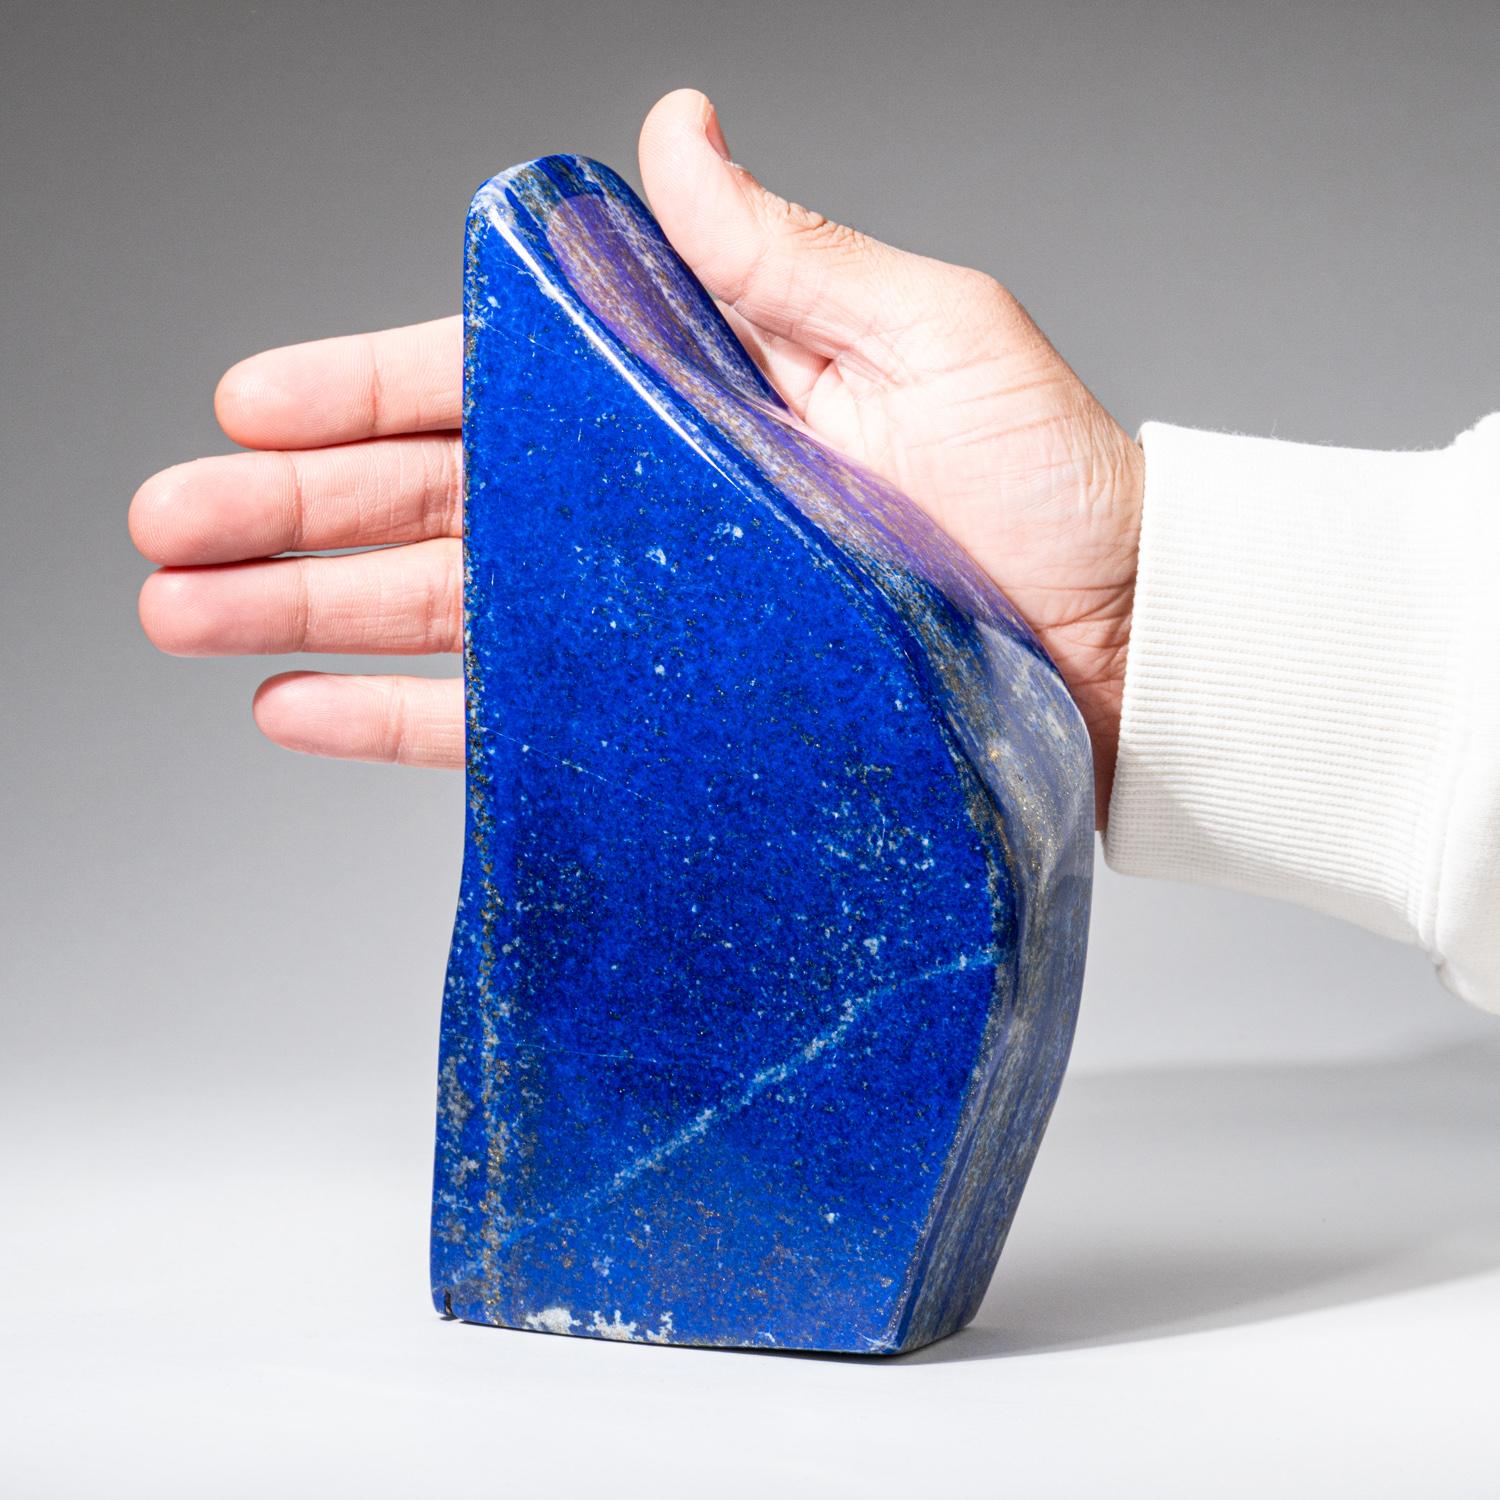 Crystal Genuine Polished Lapis Lazuli Freeform from Afghanistan '4 lbs' For Sale